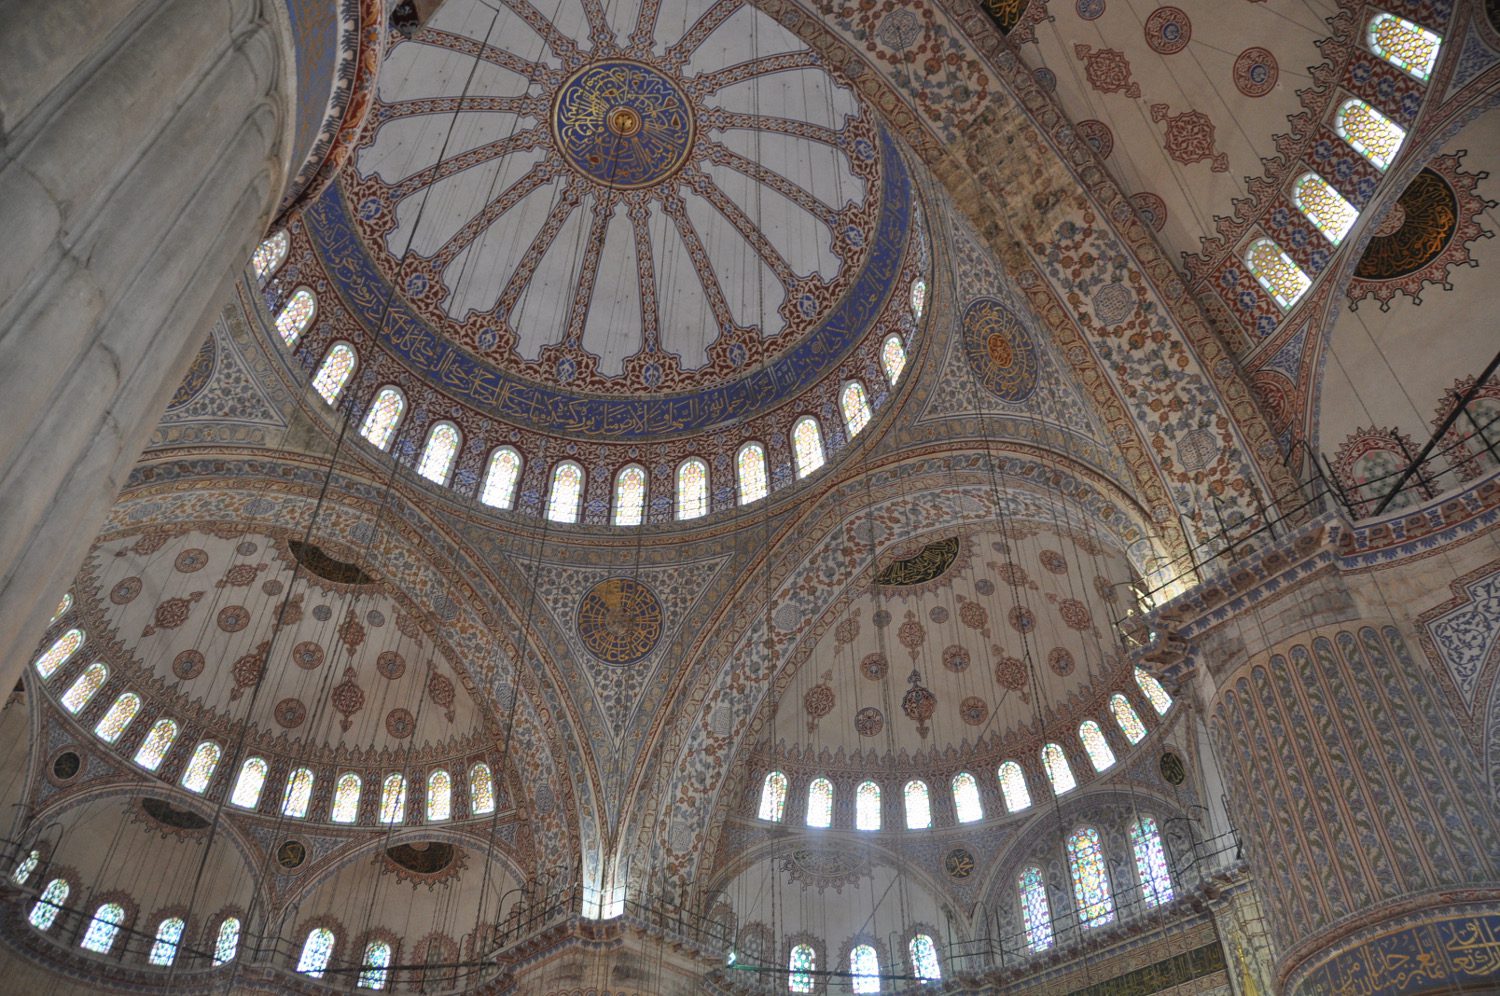 The Blue Mosque is a stunner on the outside as well as the inside!